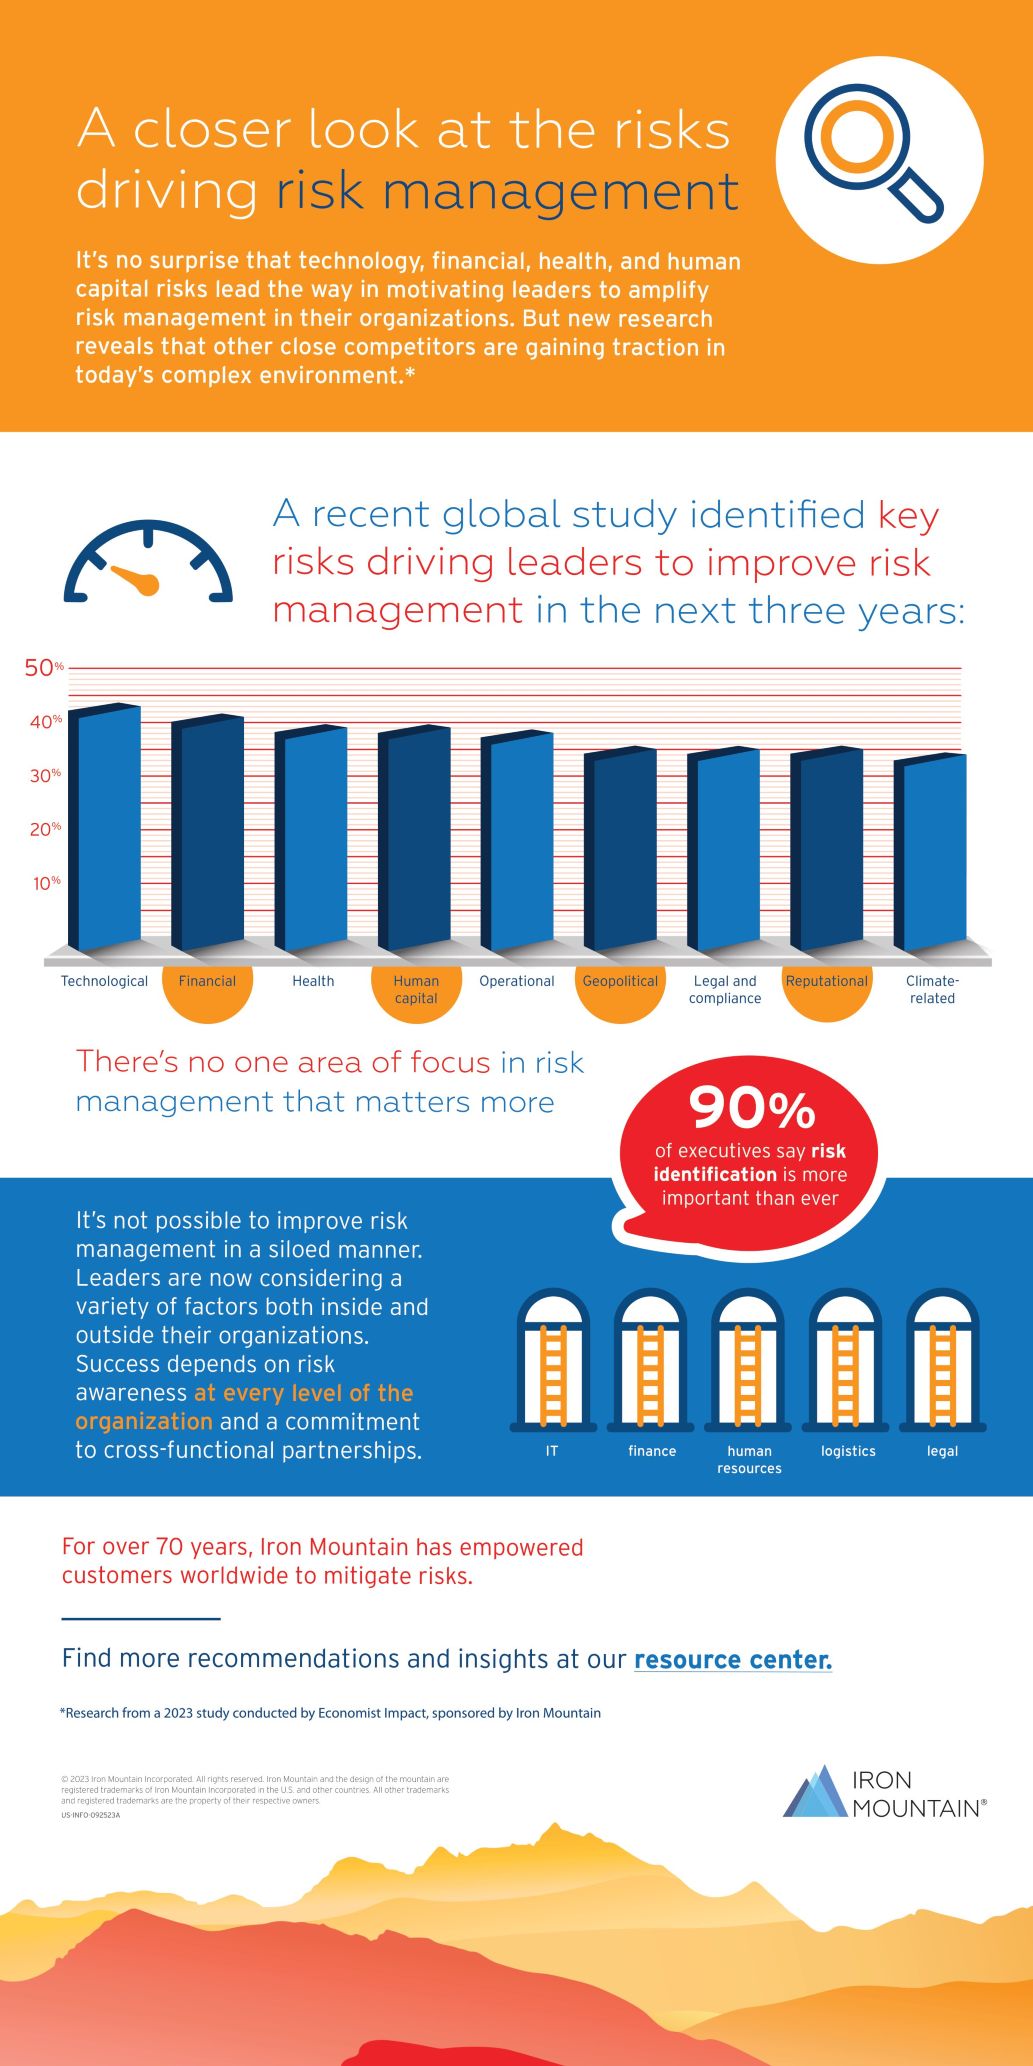 Which of the following key risks will drive your peers' efforts to improve risk management?